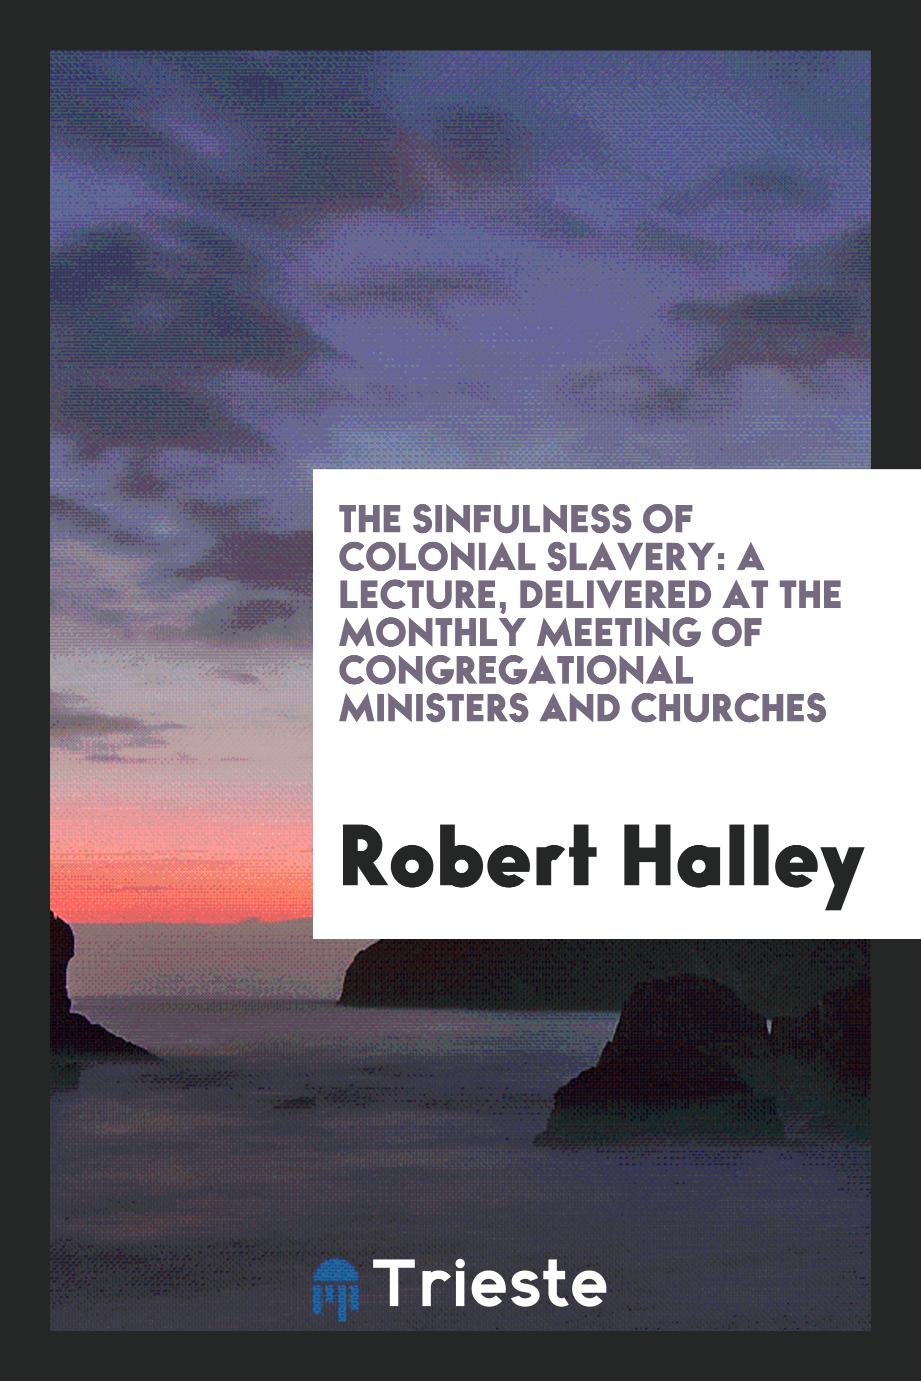 The Sinfulness of Colonial Slavery: A Lecture, Delivered at the Monthly Meeting of congregational ministers and churches